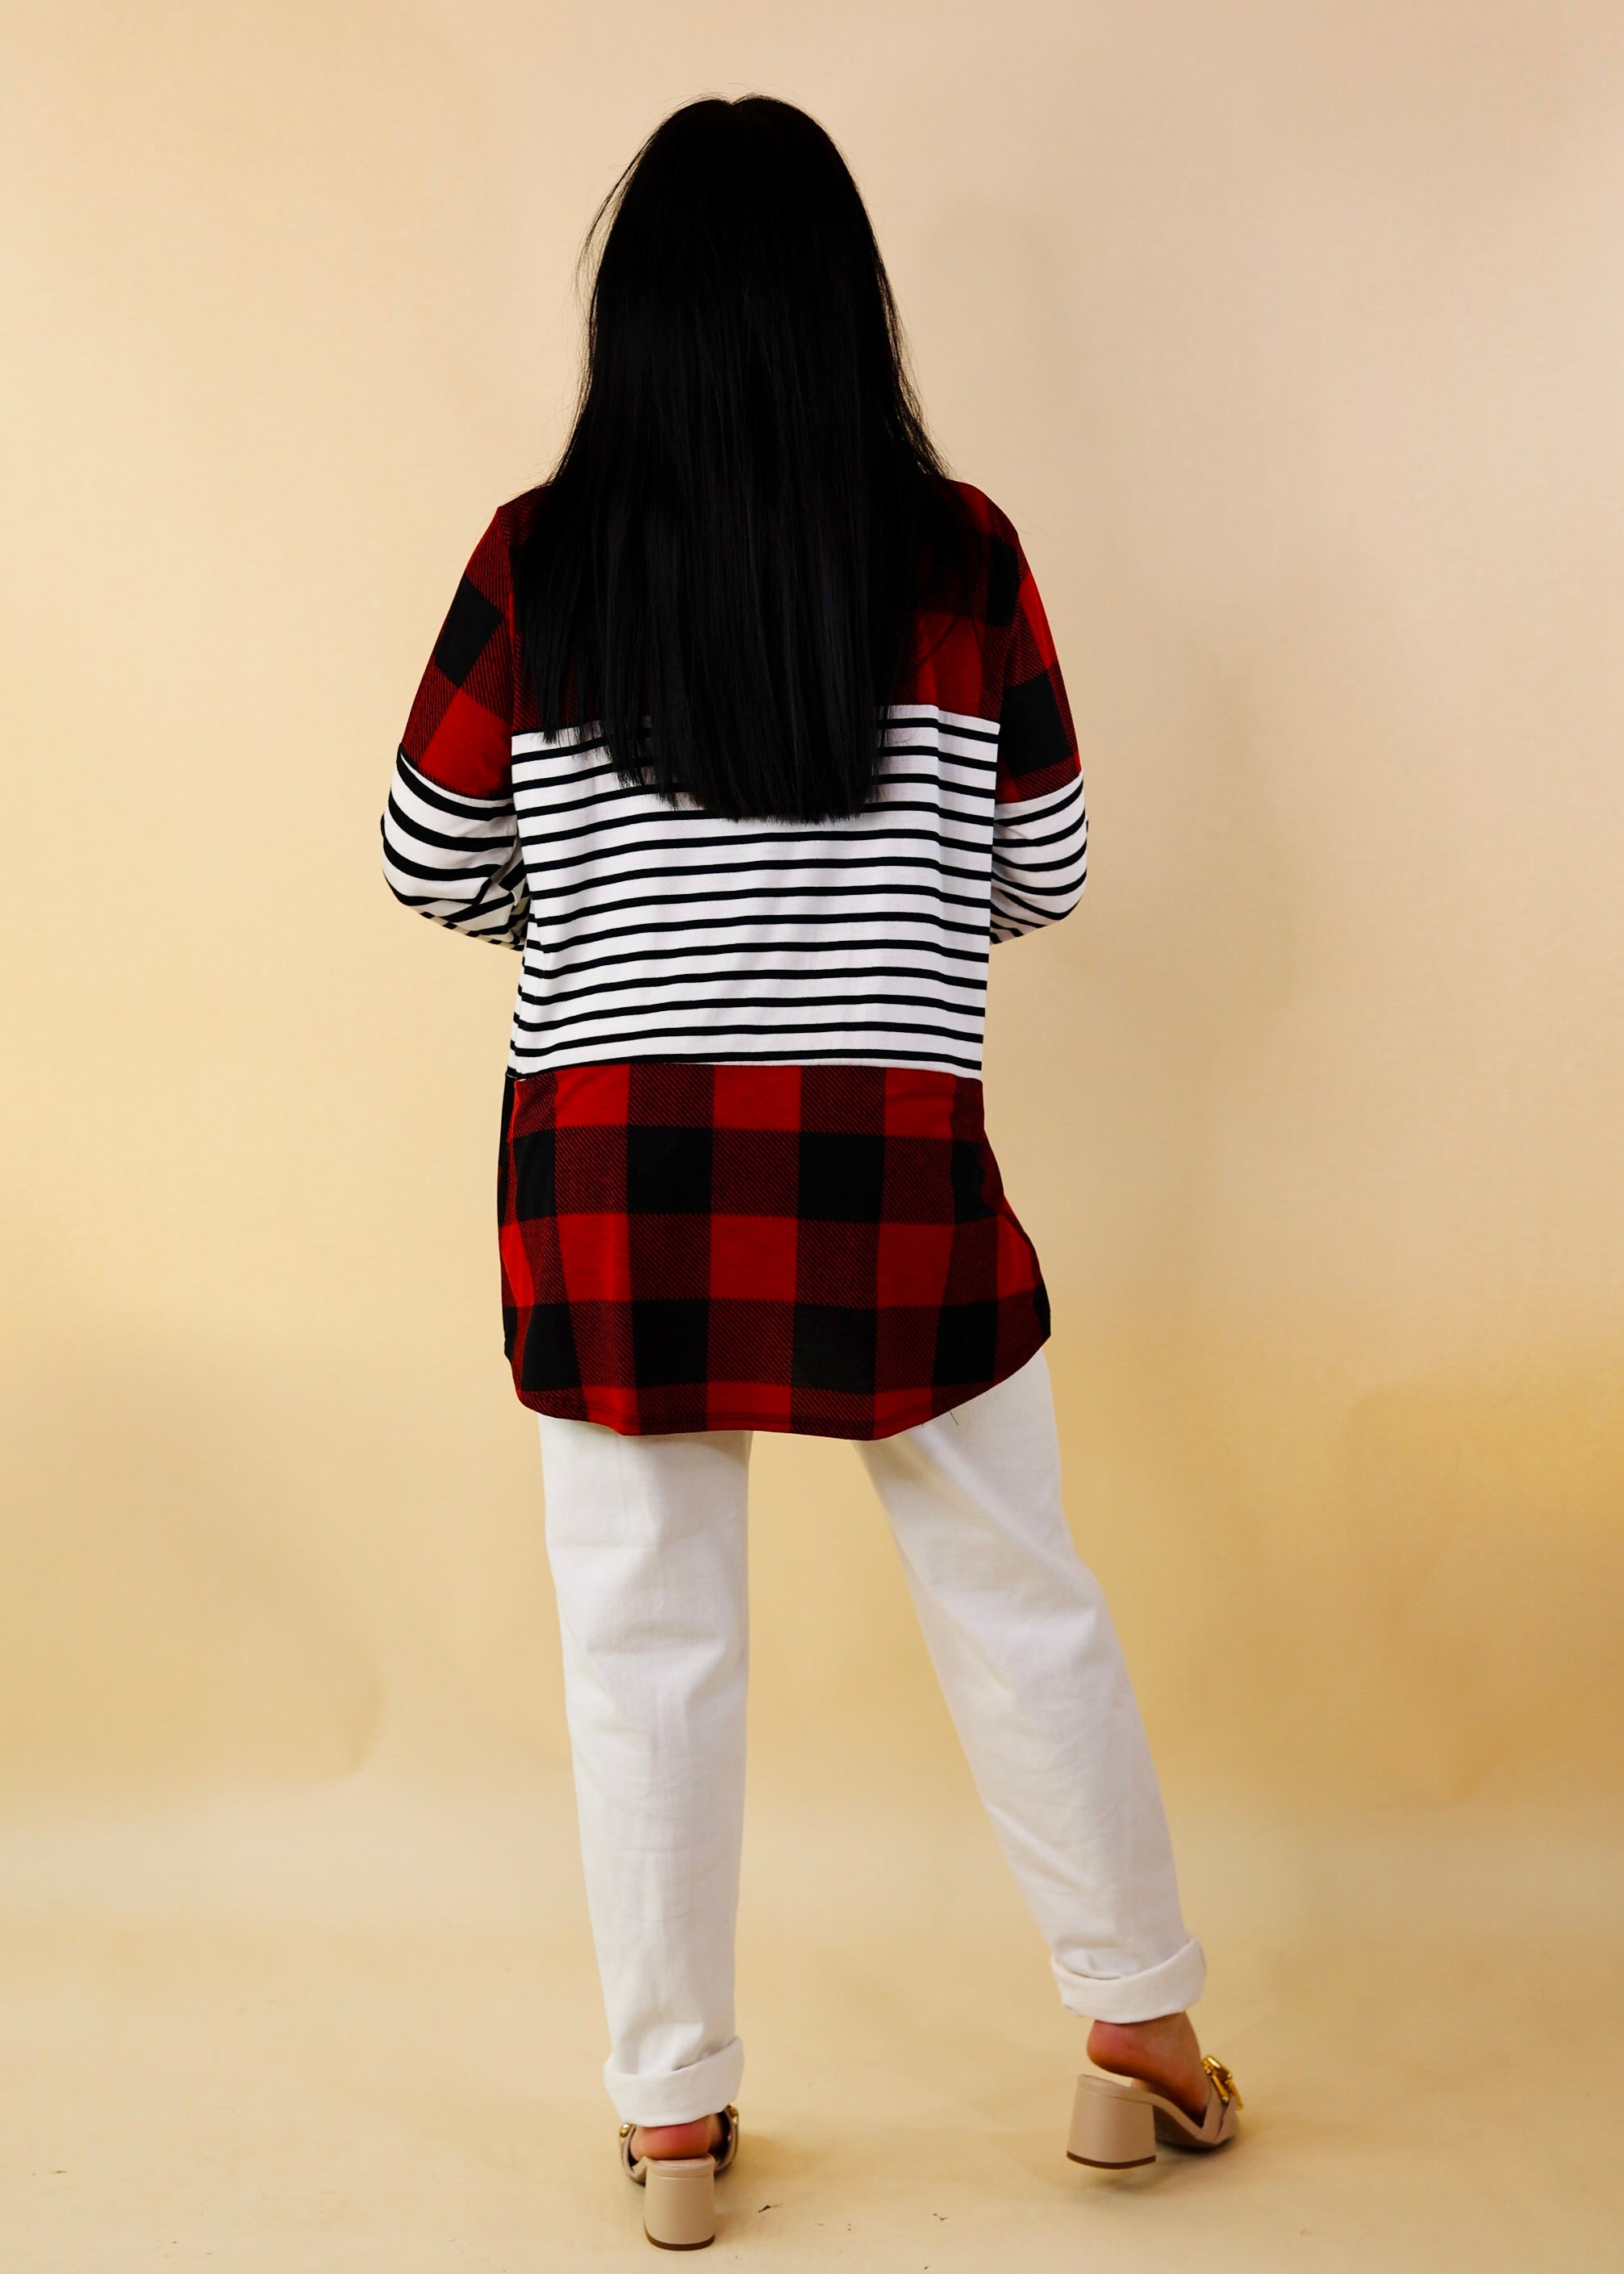 Blemished | Cozy Cabin Vibes Buffalo Plaid and Striped Print Block Top in Red, Ivory, and Black - Giddy Up Glamour Boutique